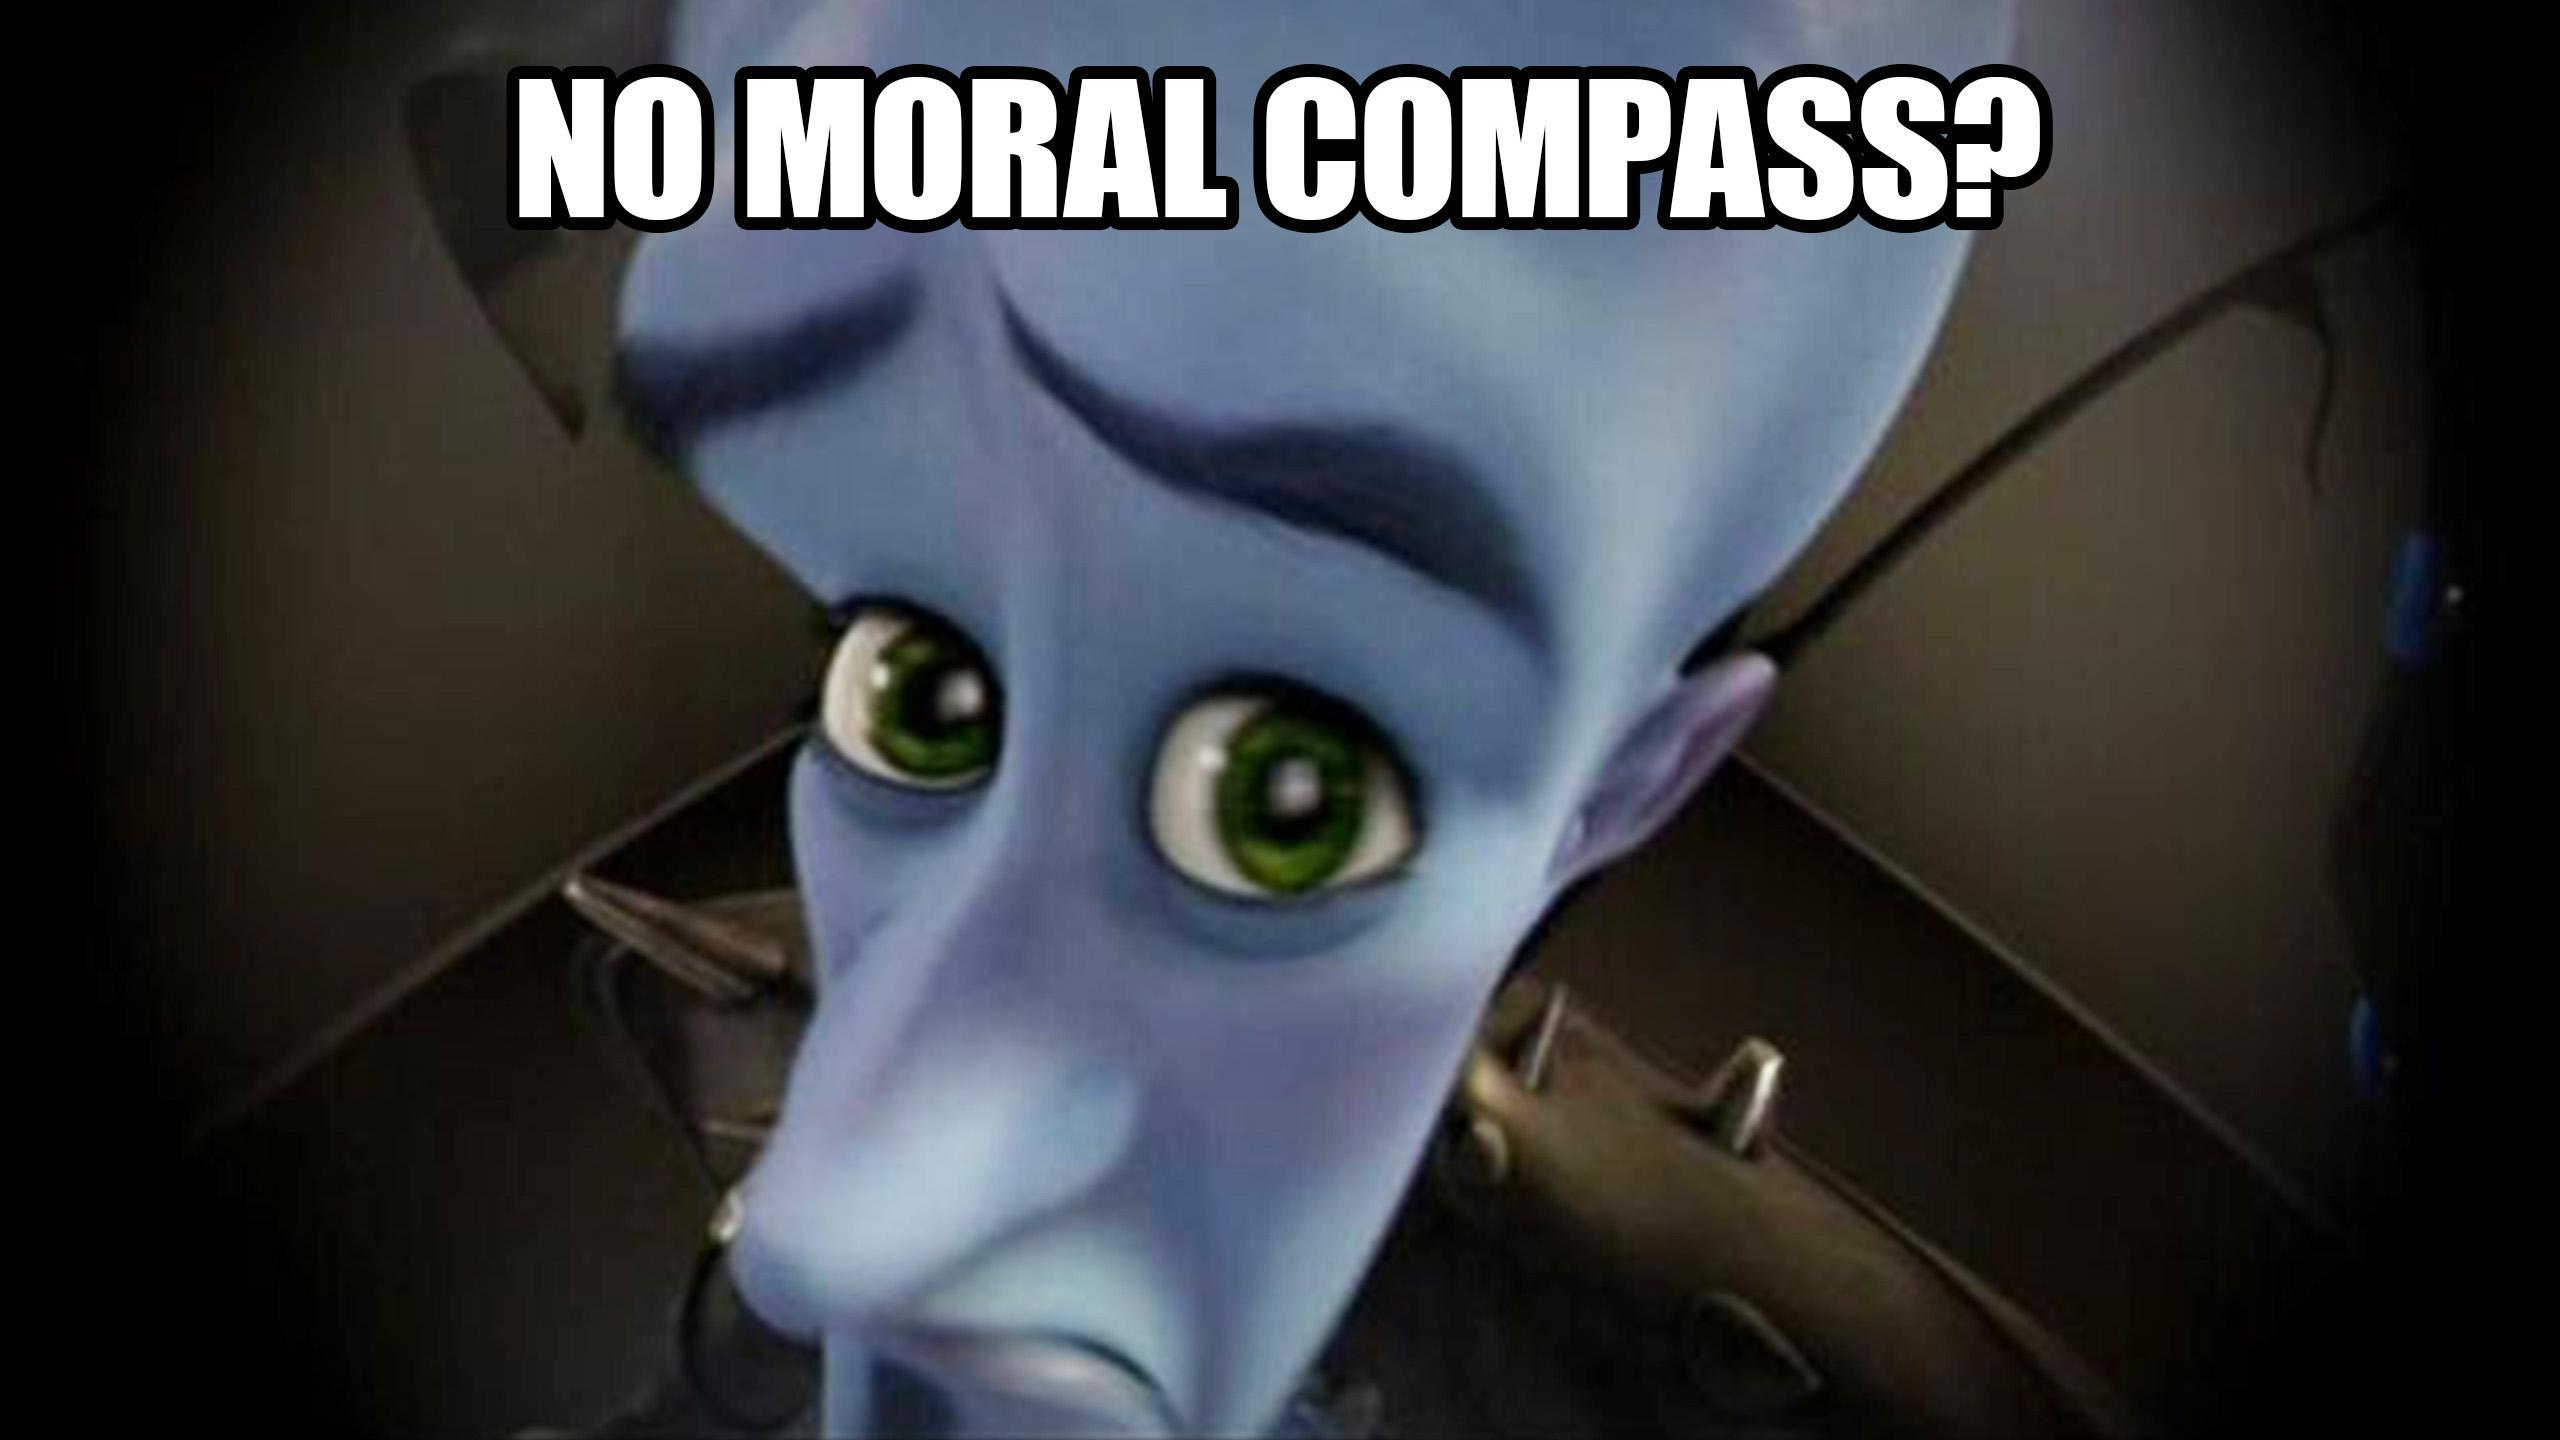 Megamind Evil? Dissecting what it means to be good - The Eyeopener